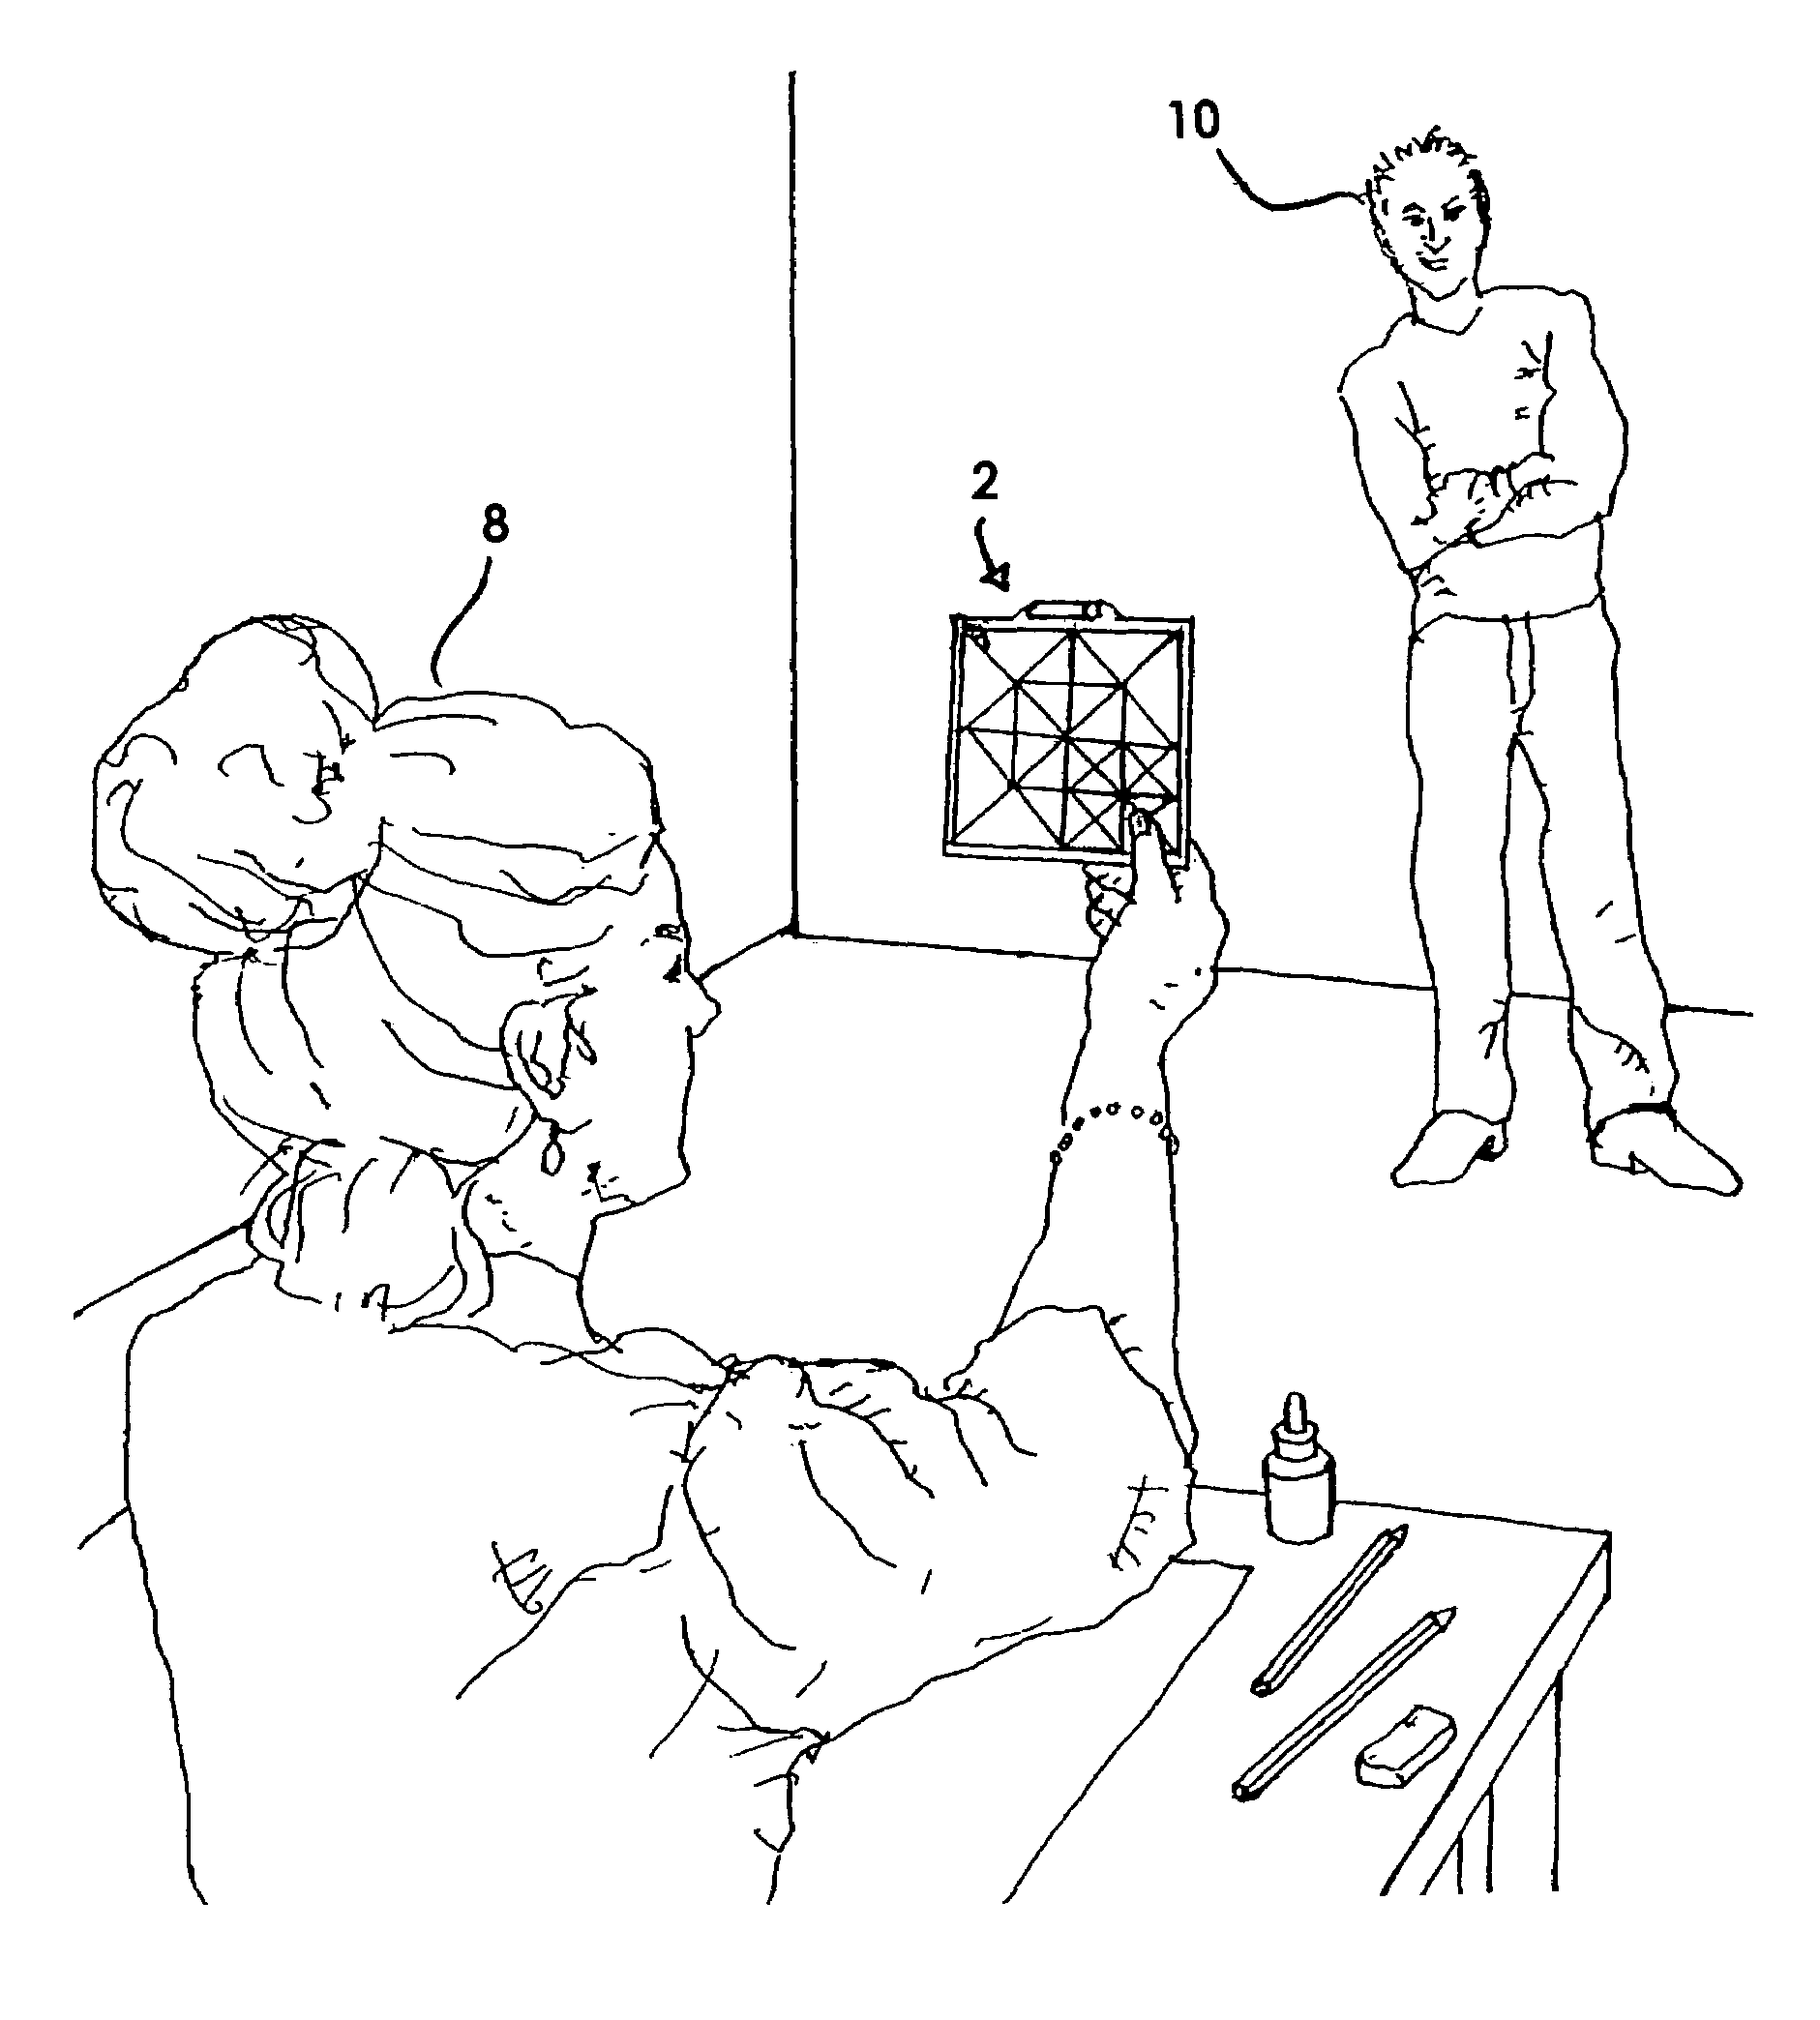 Artists's grid viewing device and method of use